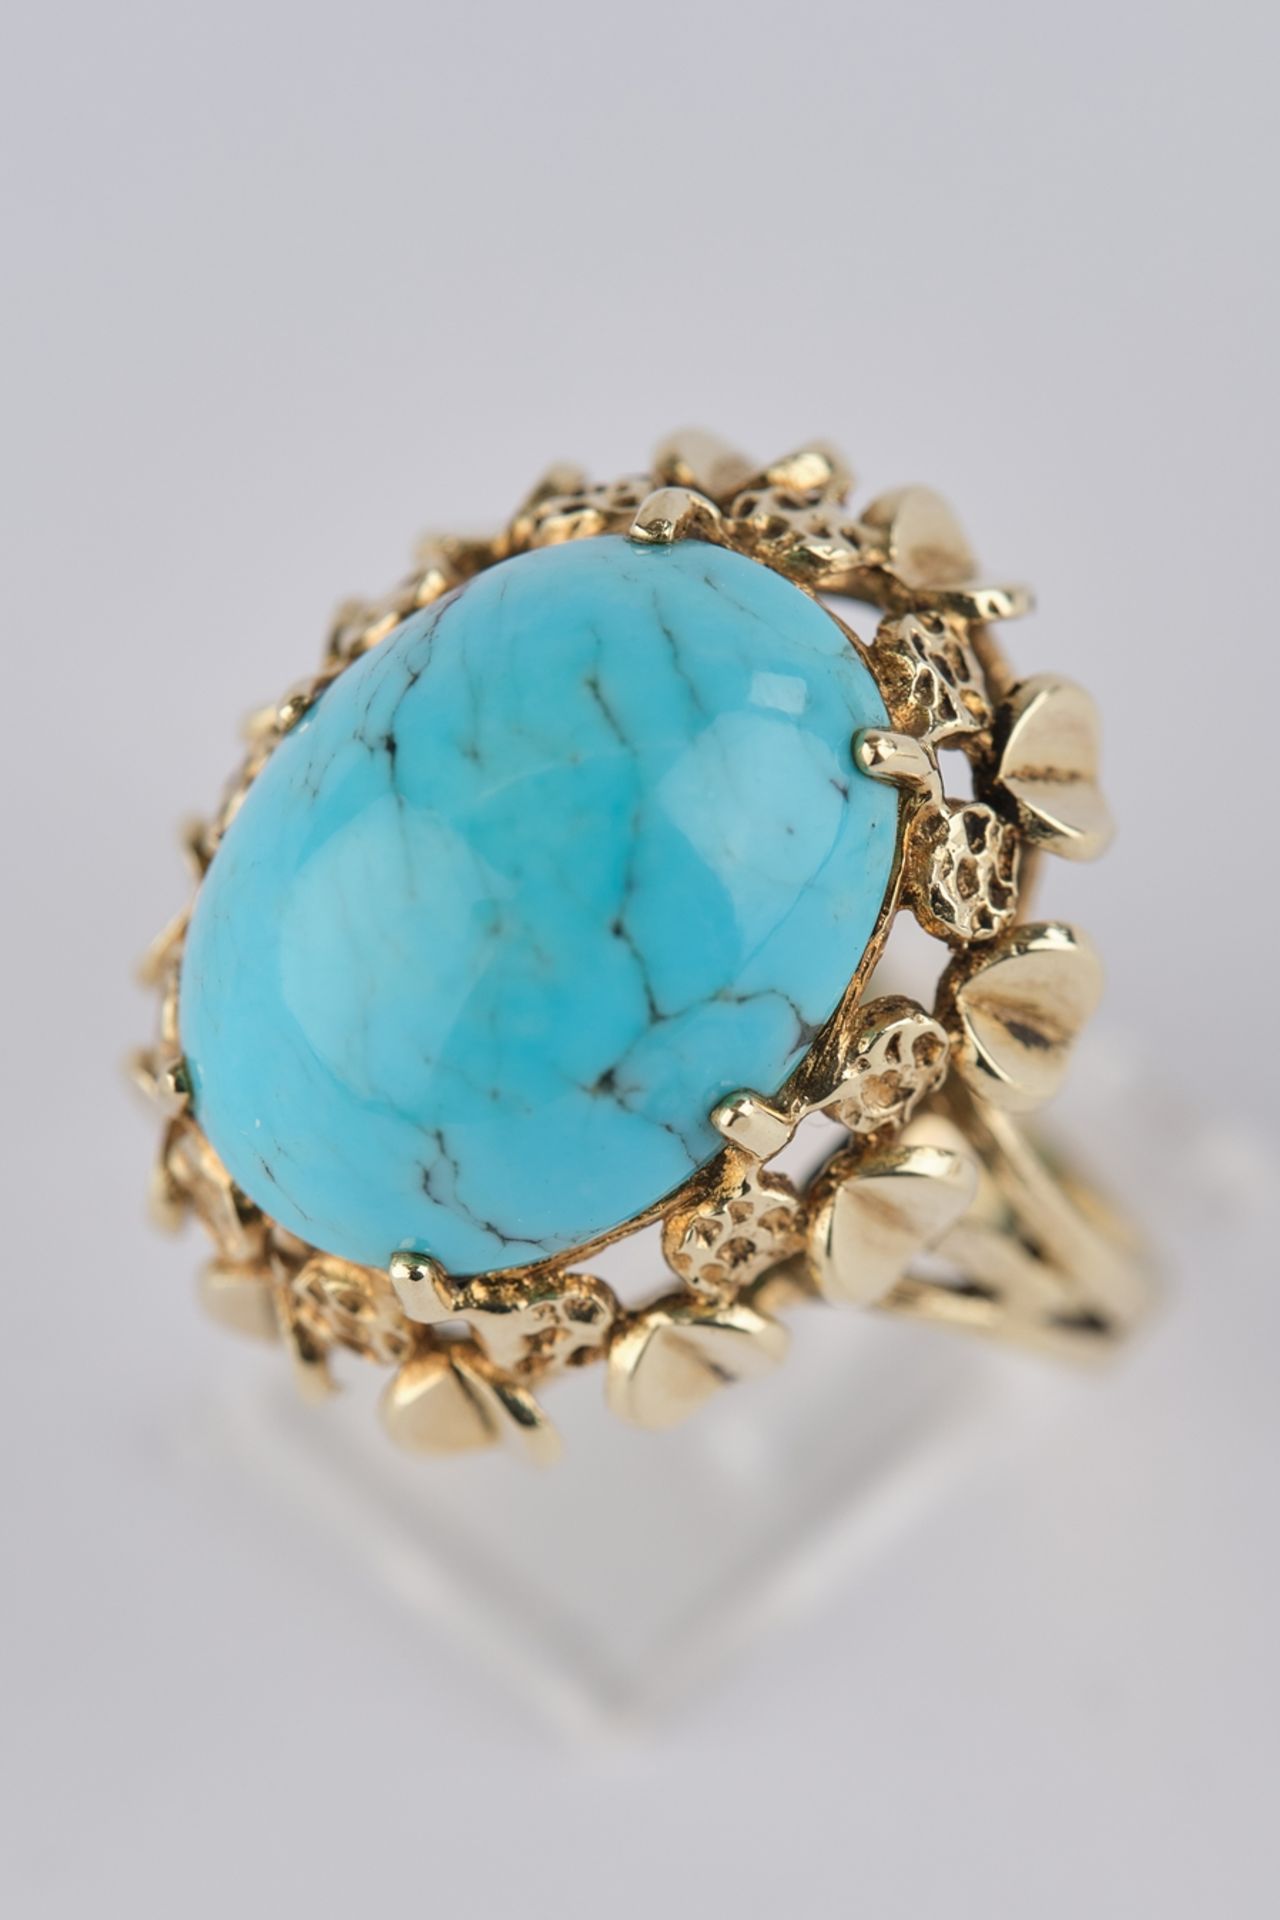 Ring, GG 585, Türkis-Cabochon, 6.6 g, RM 16 - Image 2 of 3